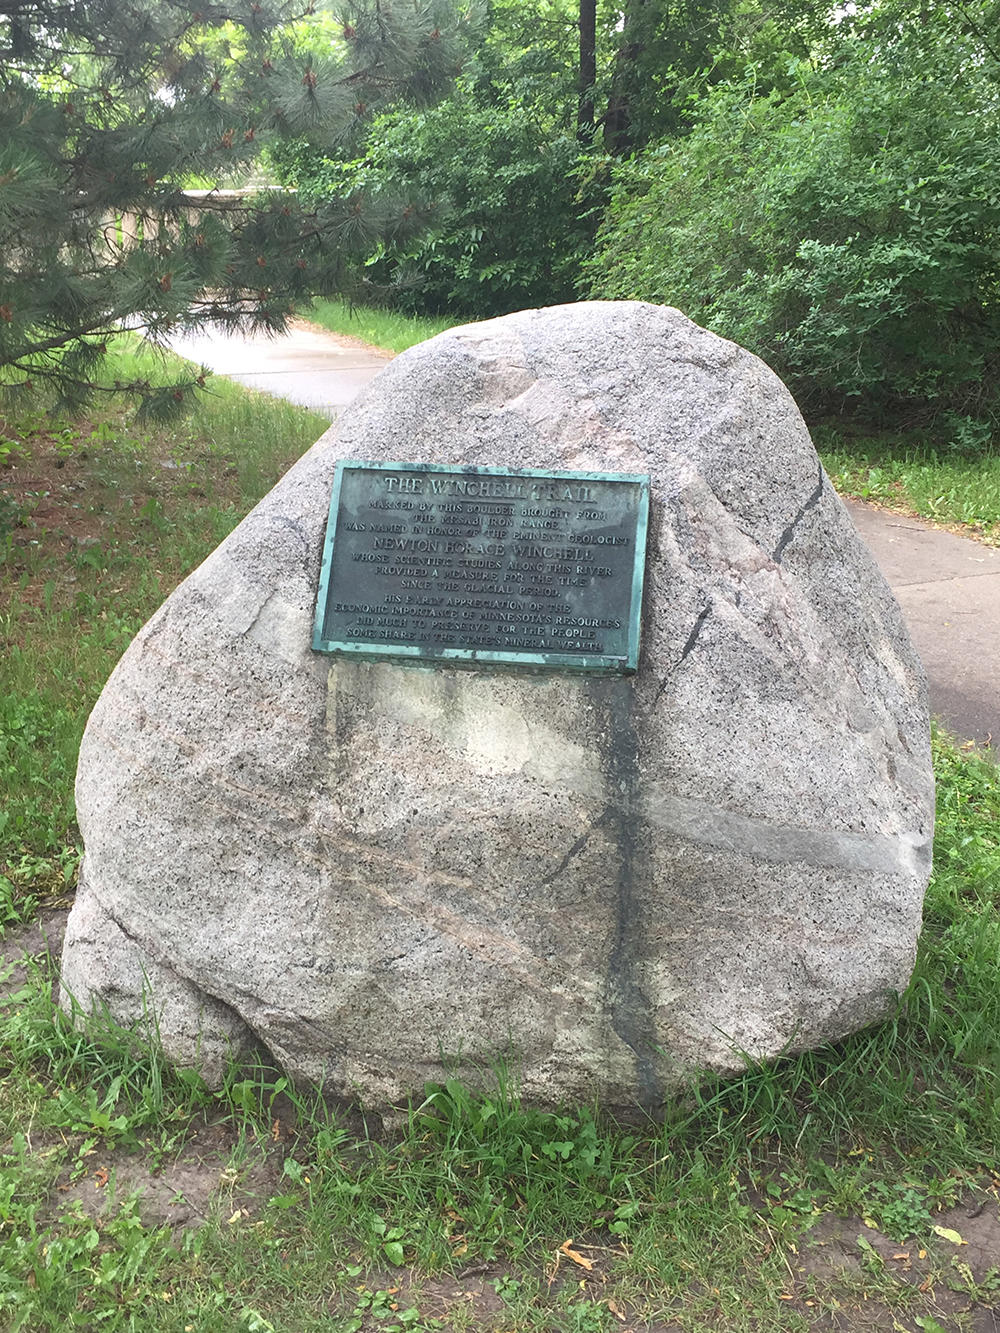 Image of the memorial boulder by the Franklin Avenue Bridge marking the Winchell Trail